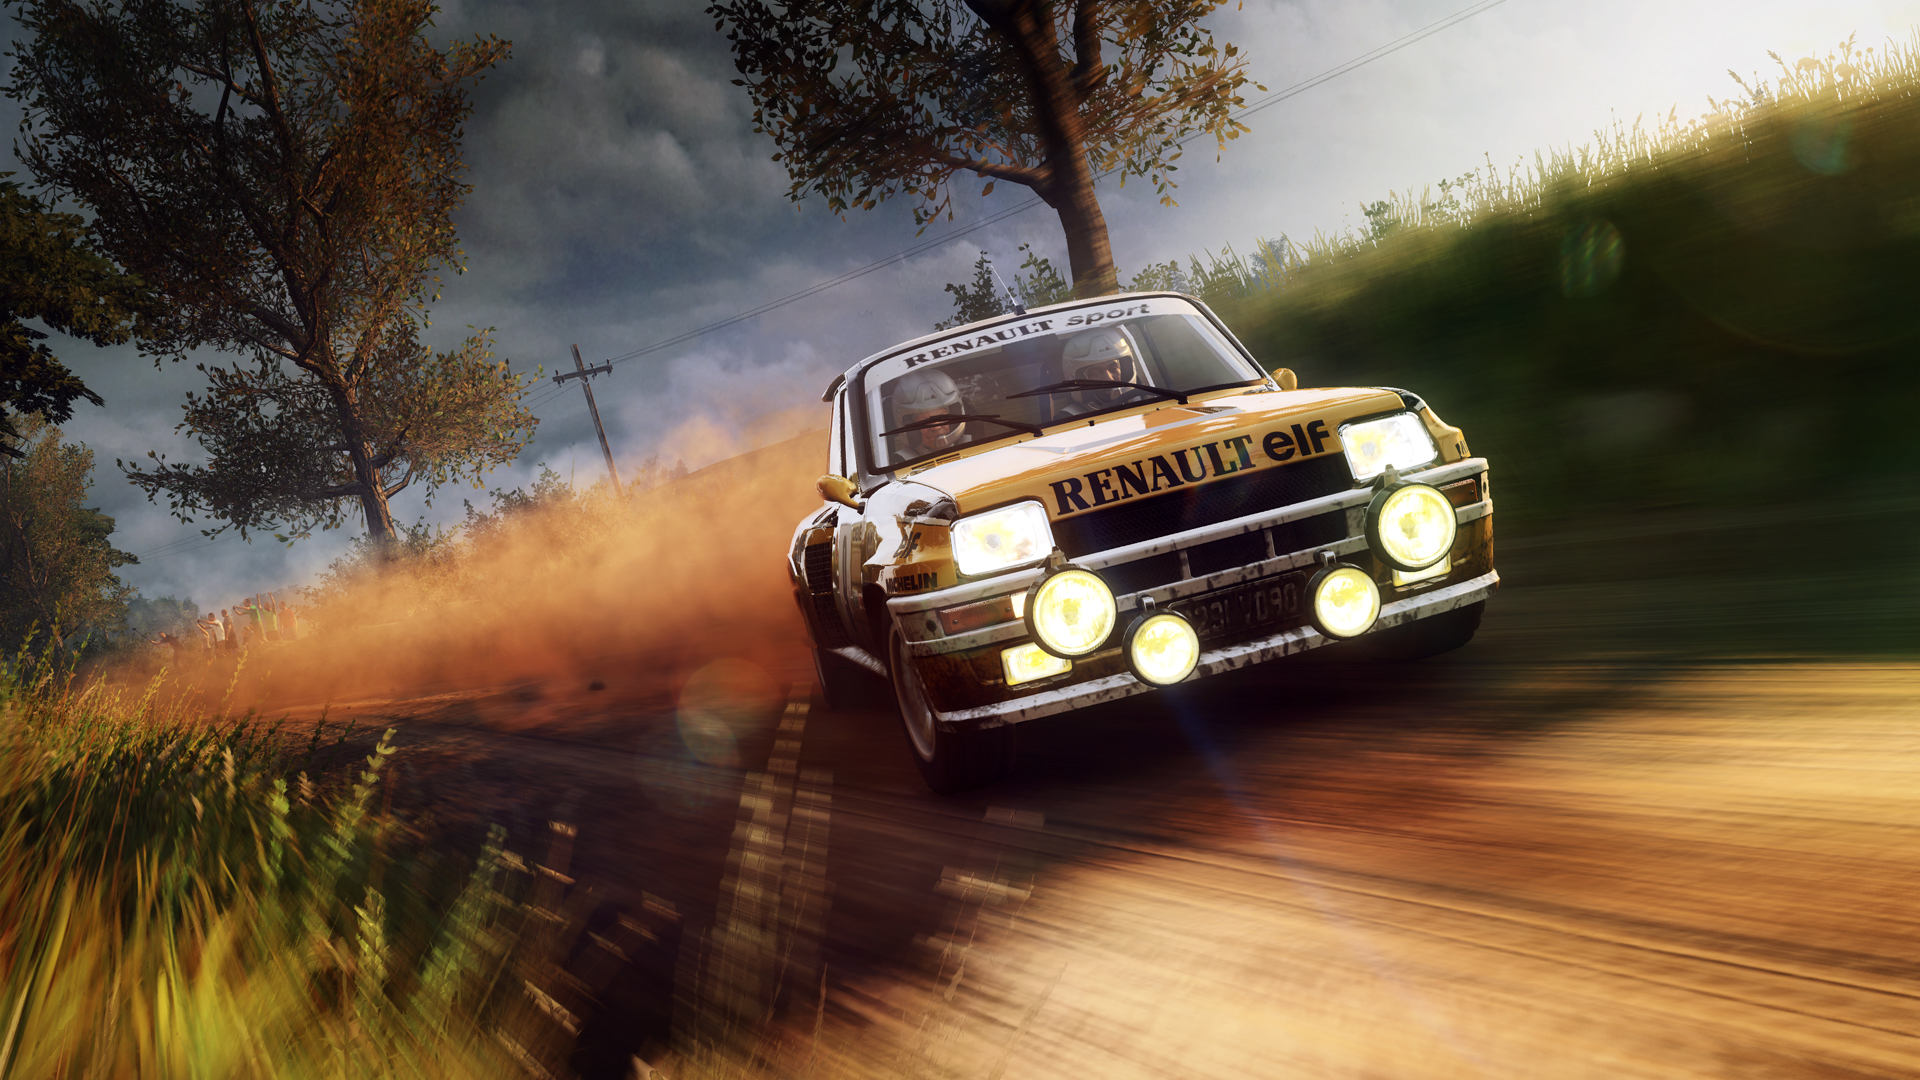 One.O.One - DiRT Rally 2.0 (PS4 & Xbox One) Find more